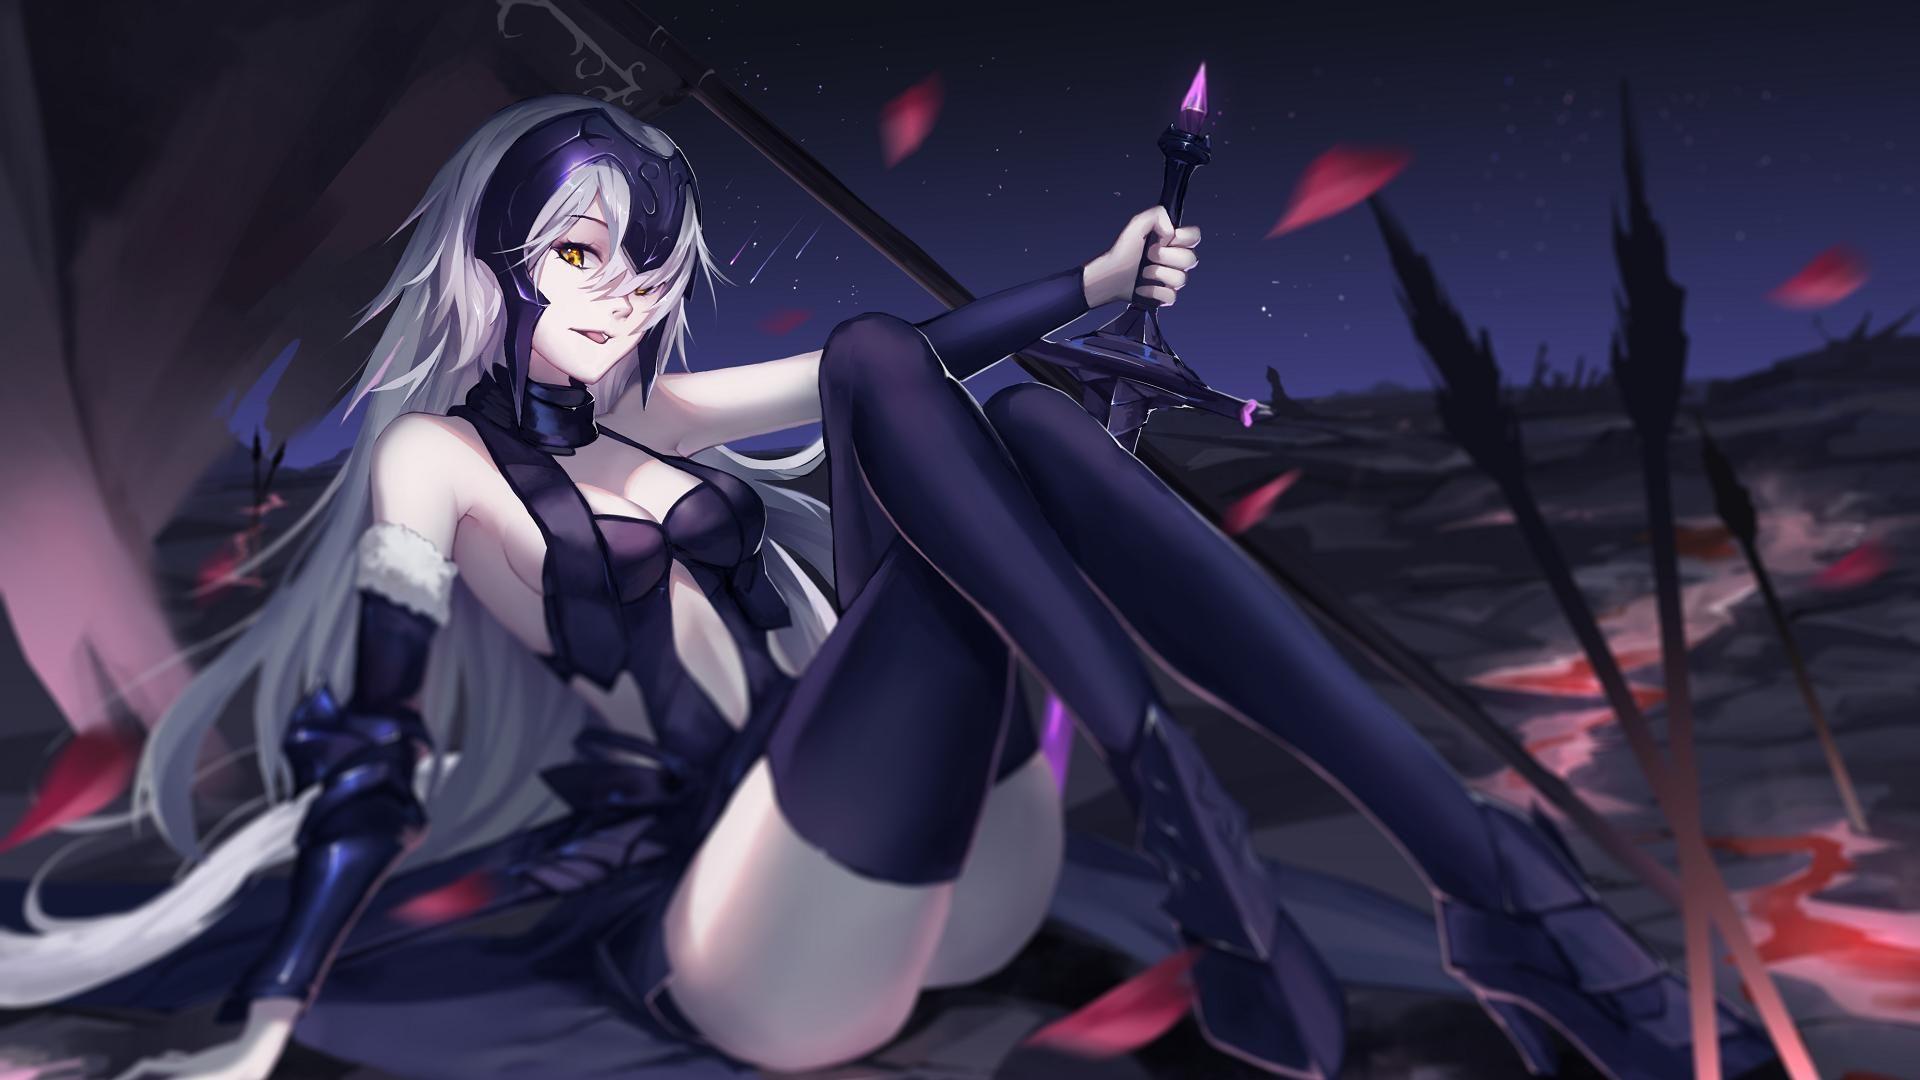 Jeanne Alter Wallpapers Wallpaper Cave.